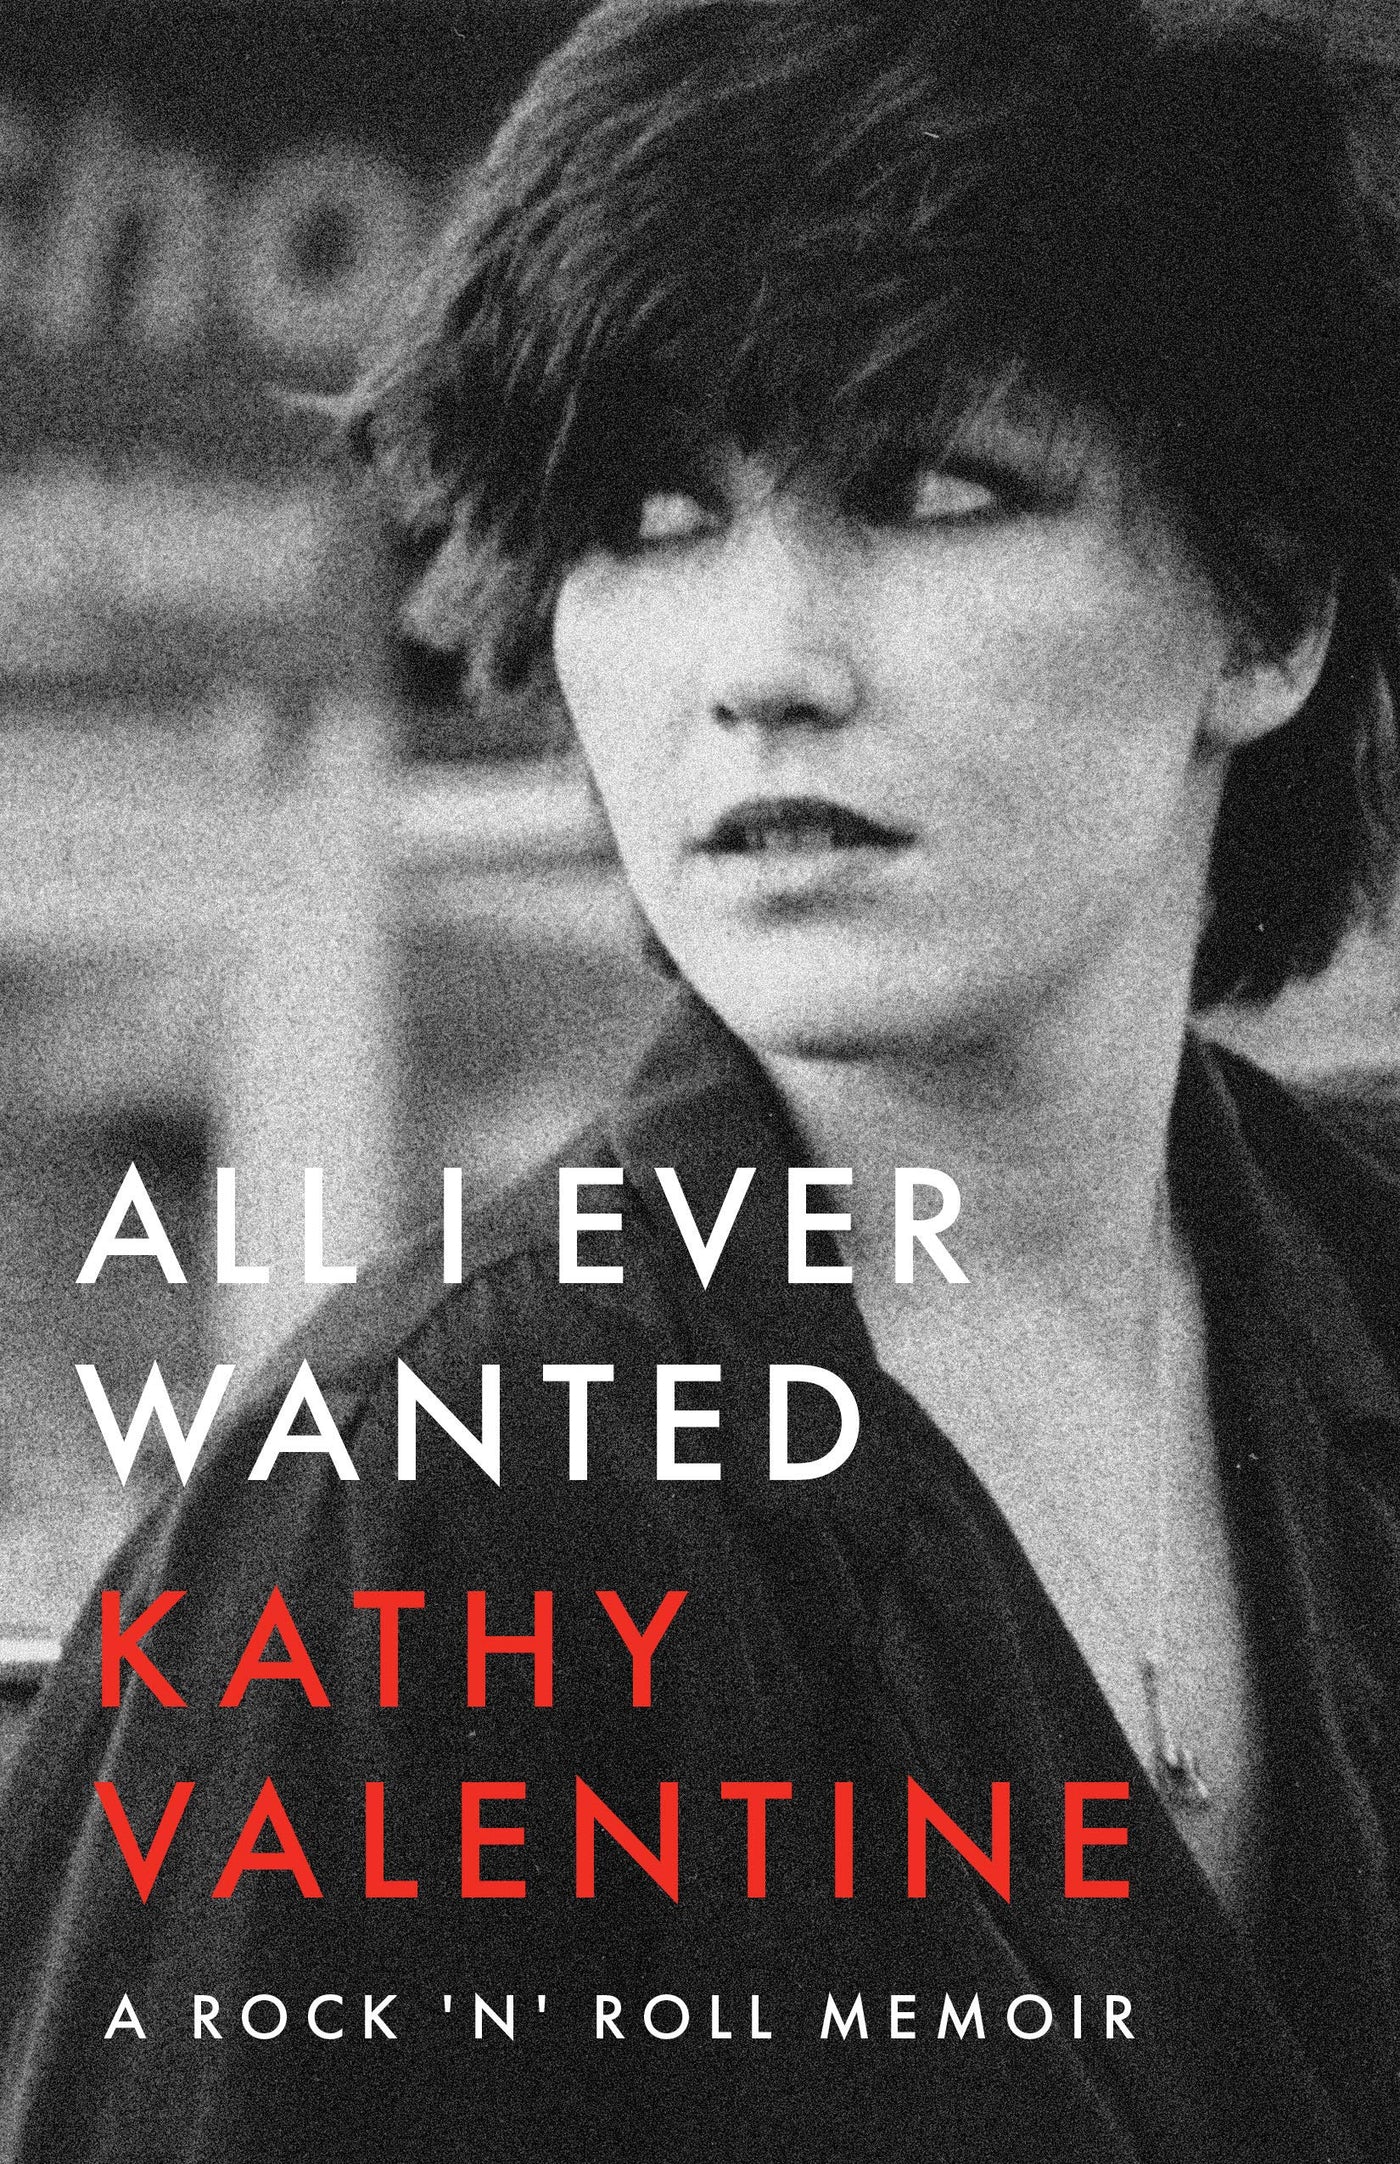 All I Ever Wanted: A Rock 'n' Roll Memoir by Kathy Valentine